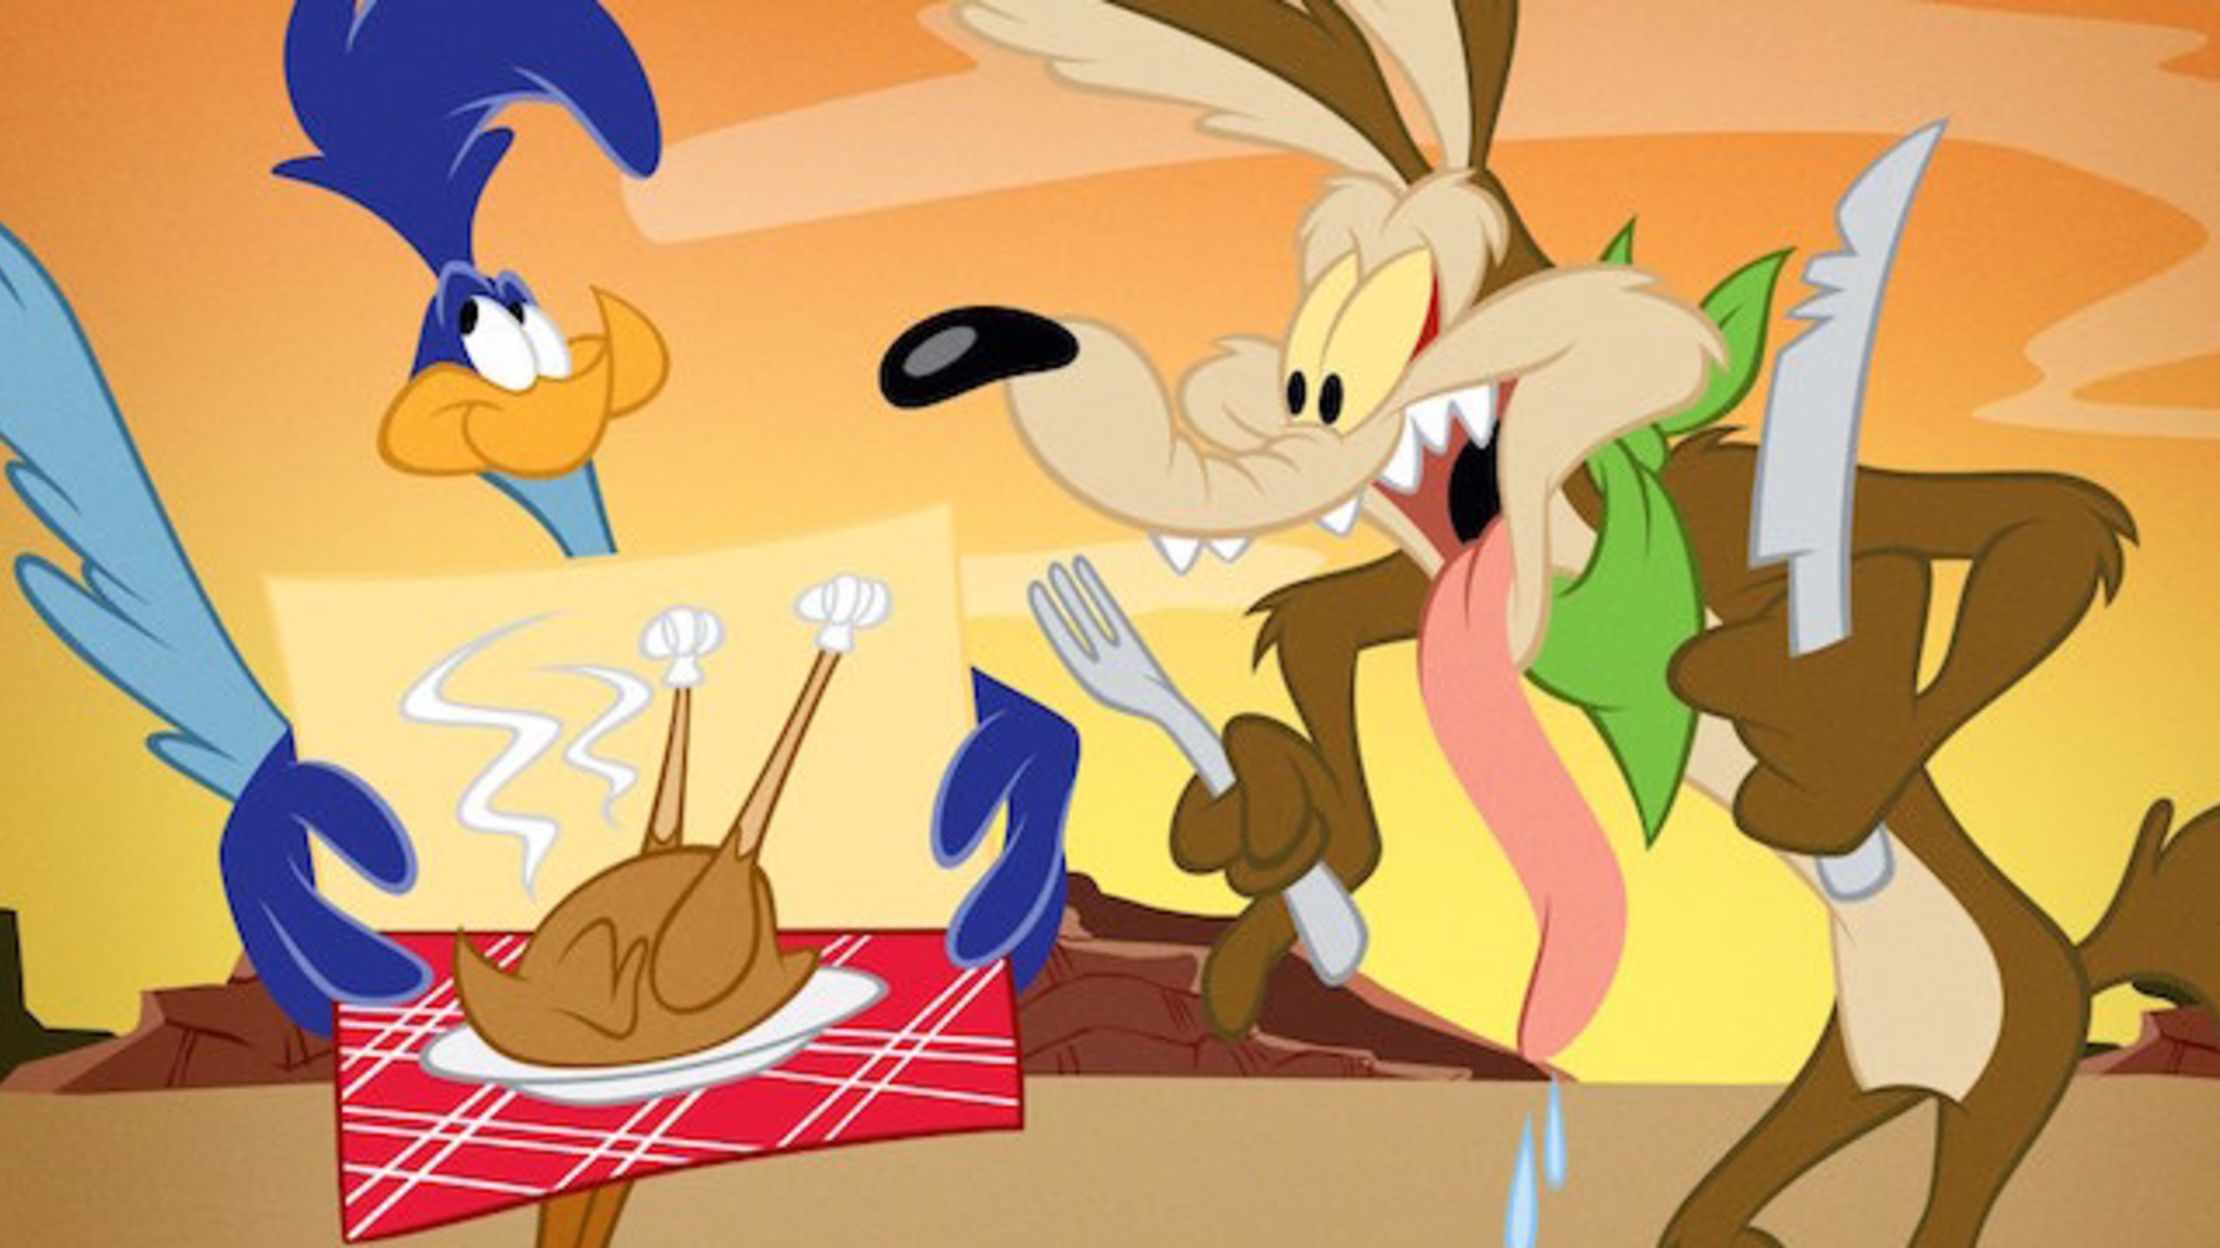 The Surprising Literary Origins of Wile E. Coyote Mental Floss.